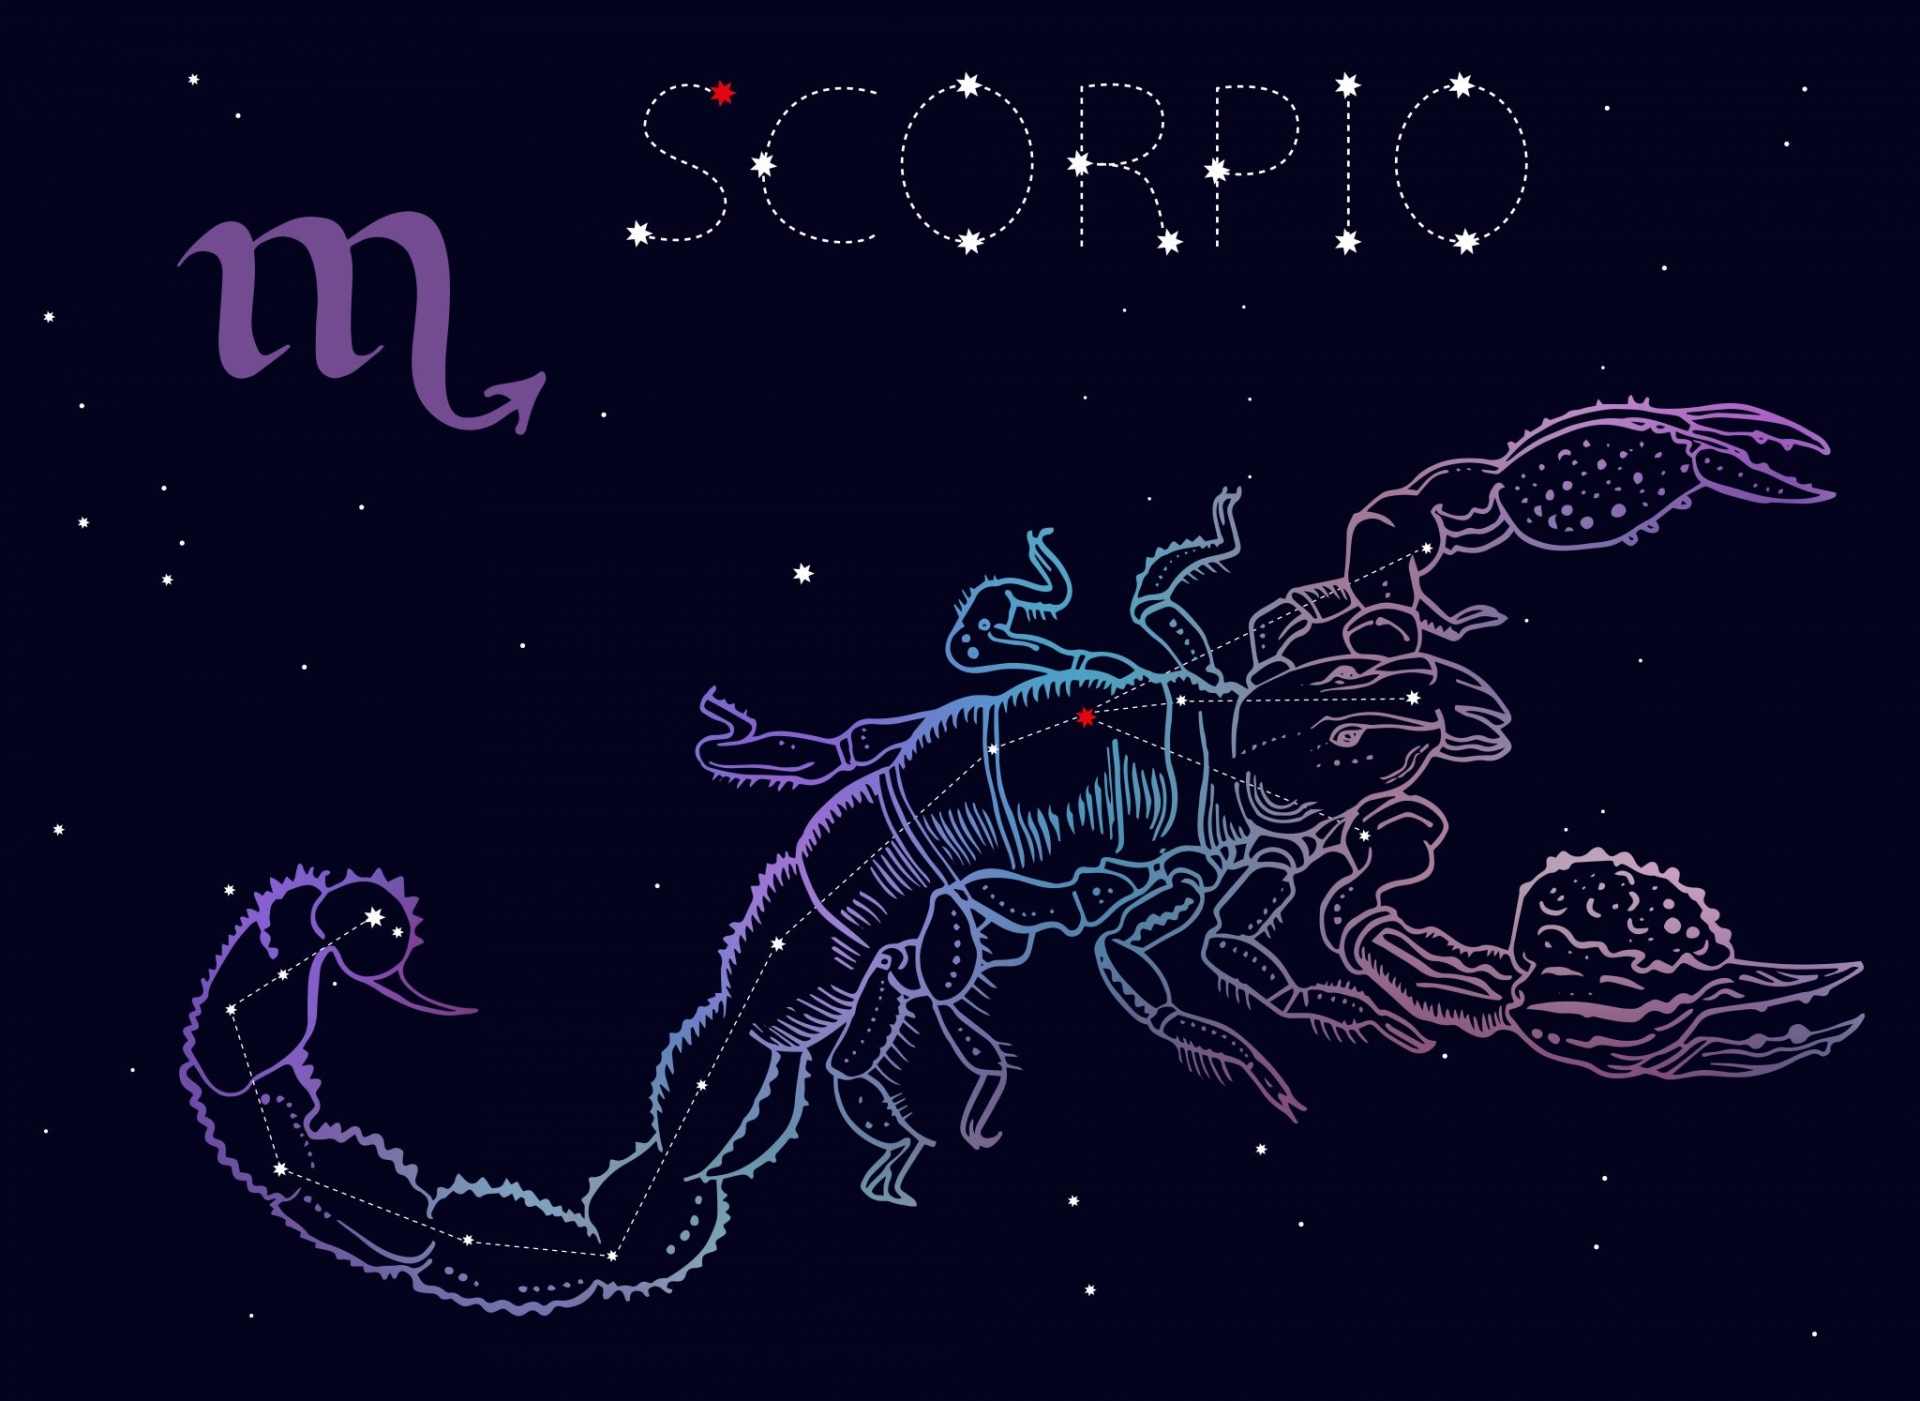 Weekly Horoscope (February 8 -14): Accurate Prediction for Love, Health, Career and Financial with 12 Zodiac Signs